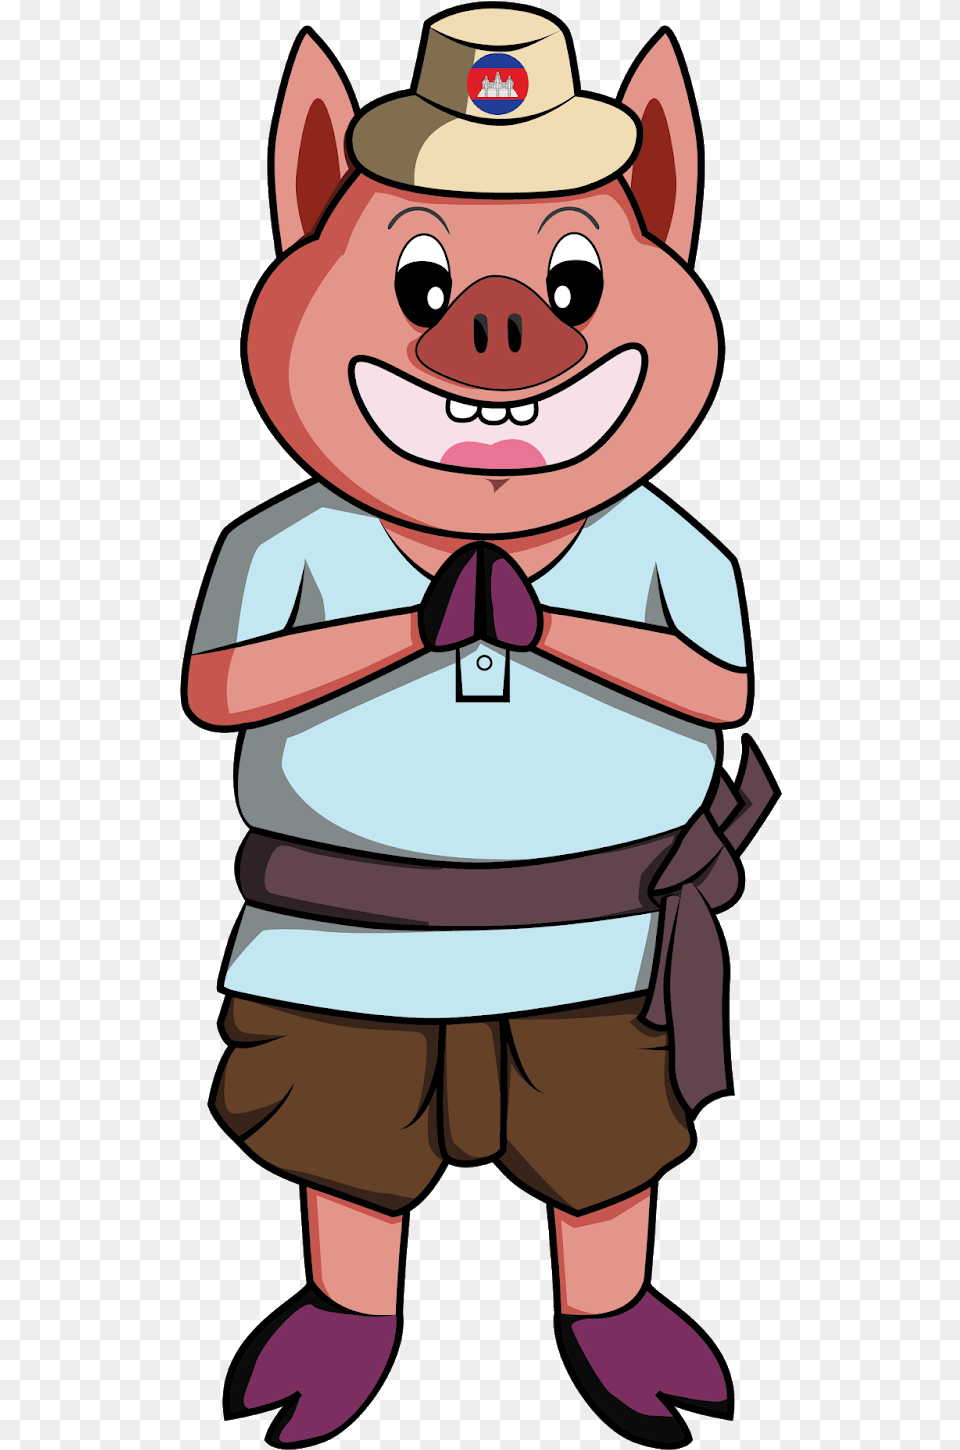 Khmer New Year 2019 Of The Pig File Vectorkh Pig Khmer New Year, Baby, Person, Cartoon, Face Free Png